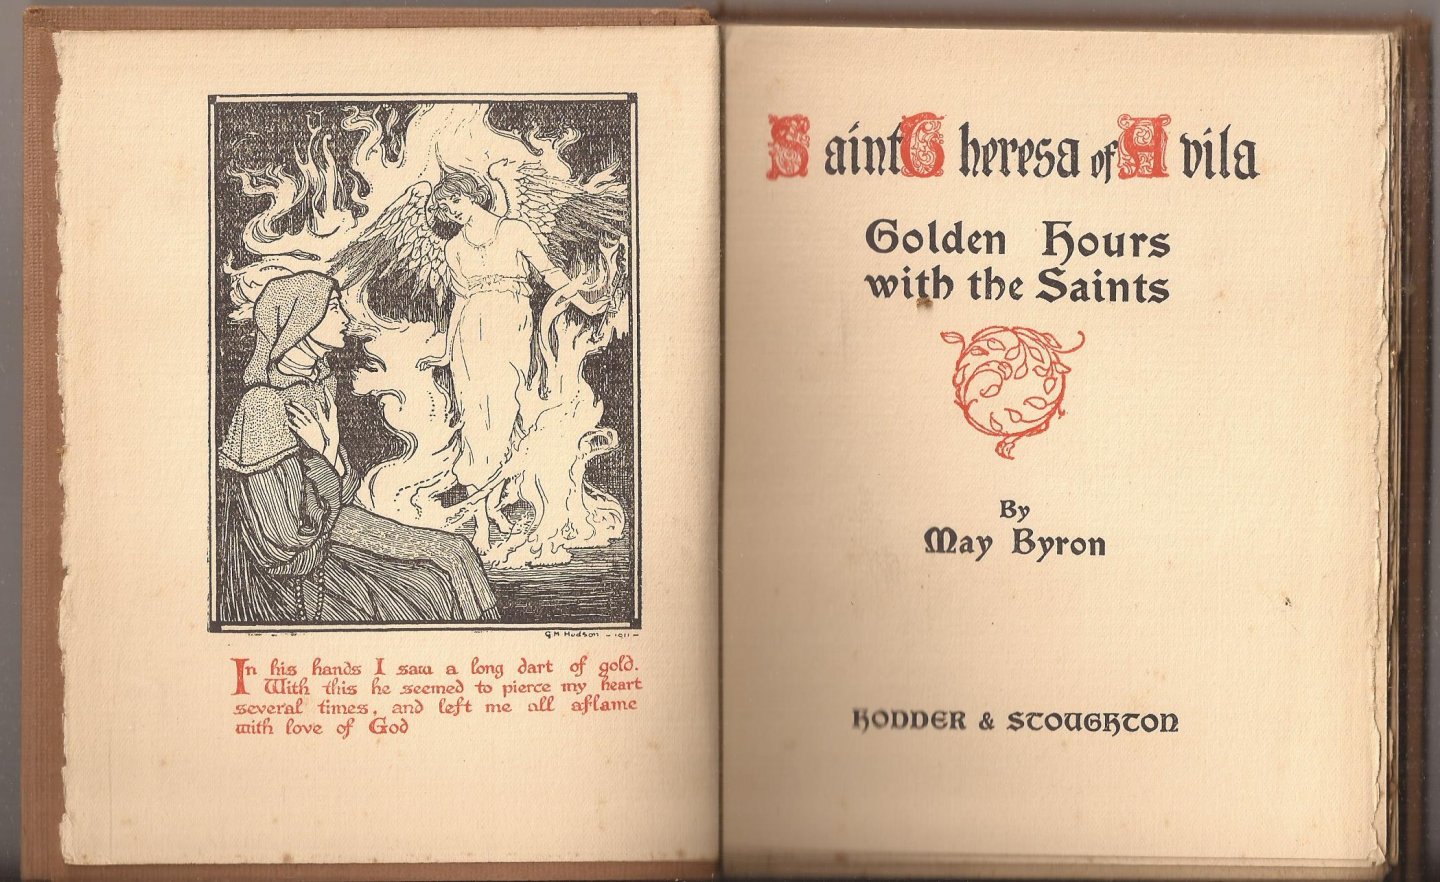 Byron, May - SAINT THERESA OF AVILA. Golden Hours with the Saints